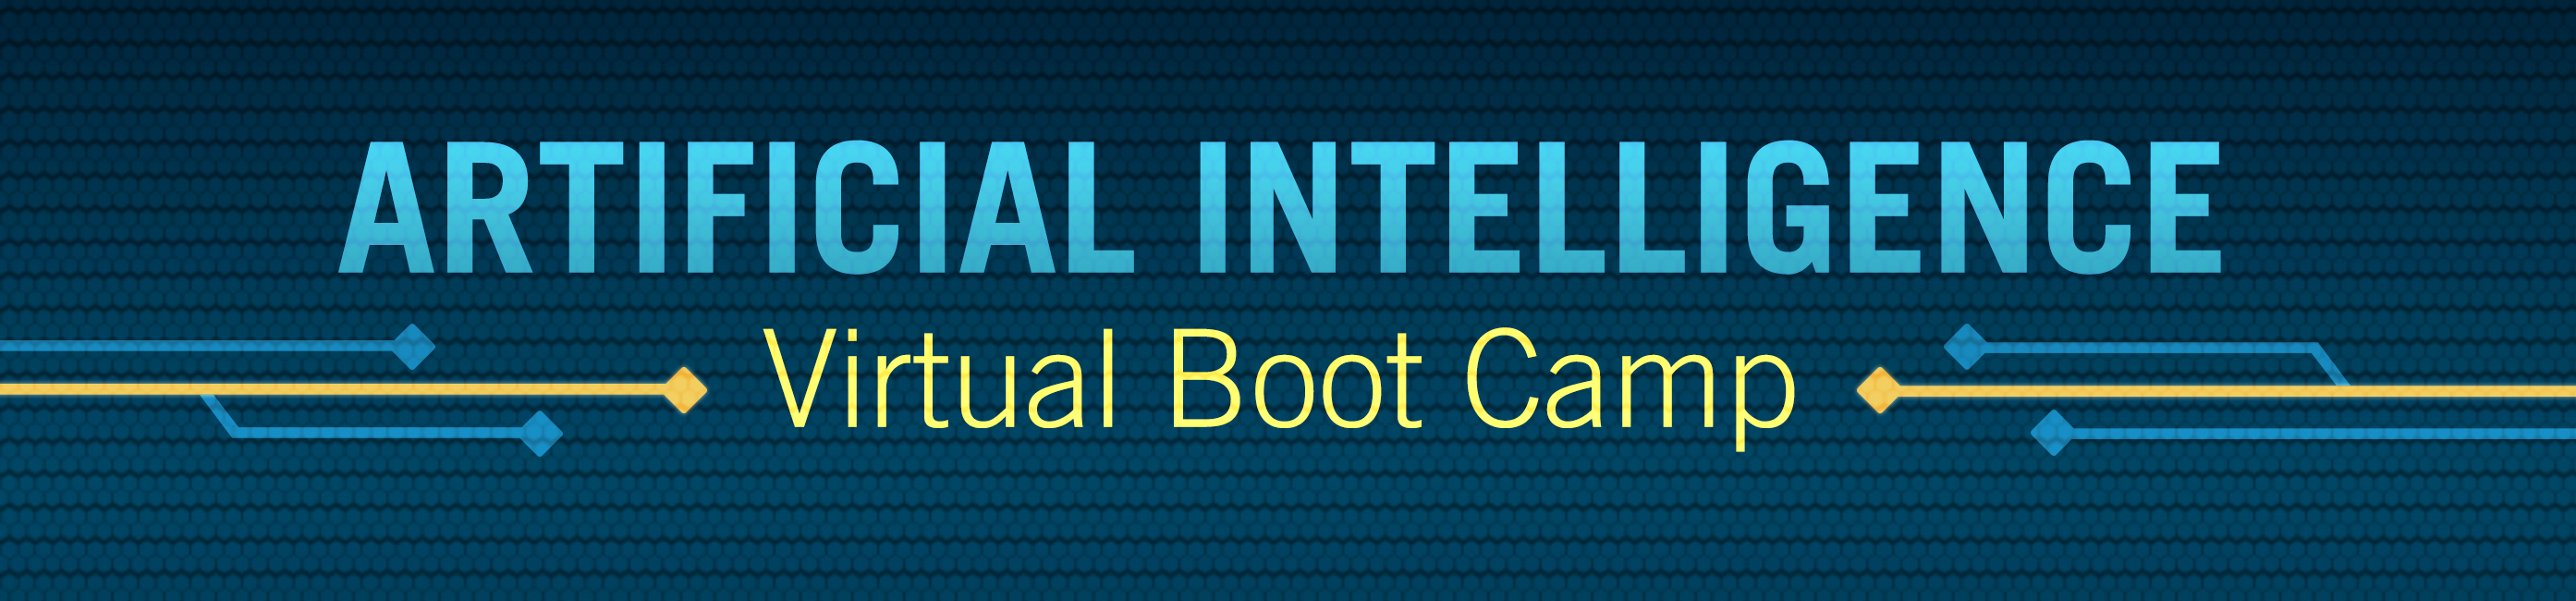 Artificial Intelligence Virtual Boot Camp